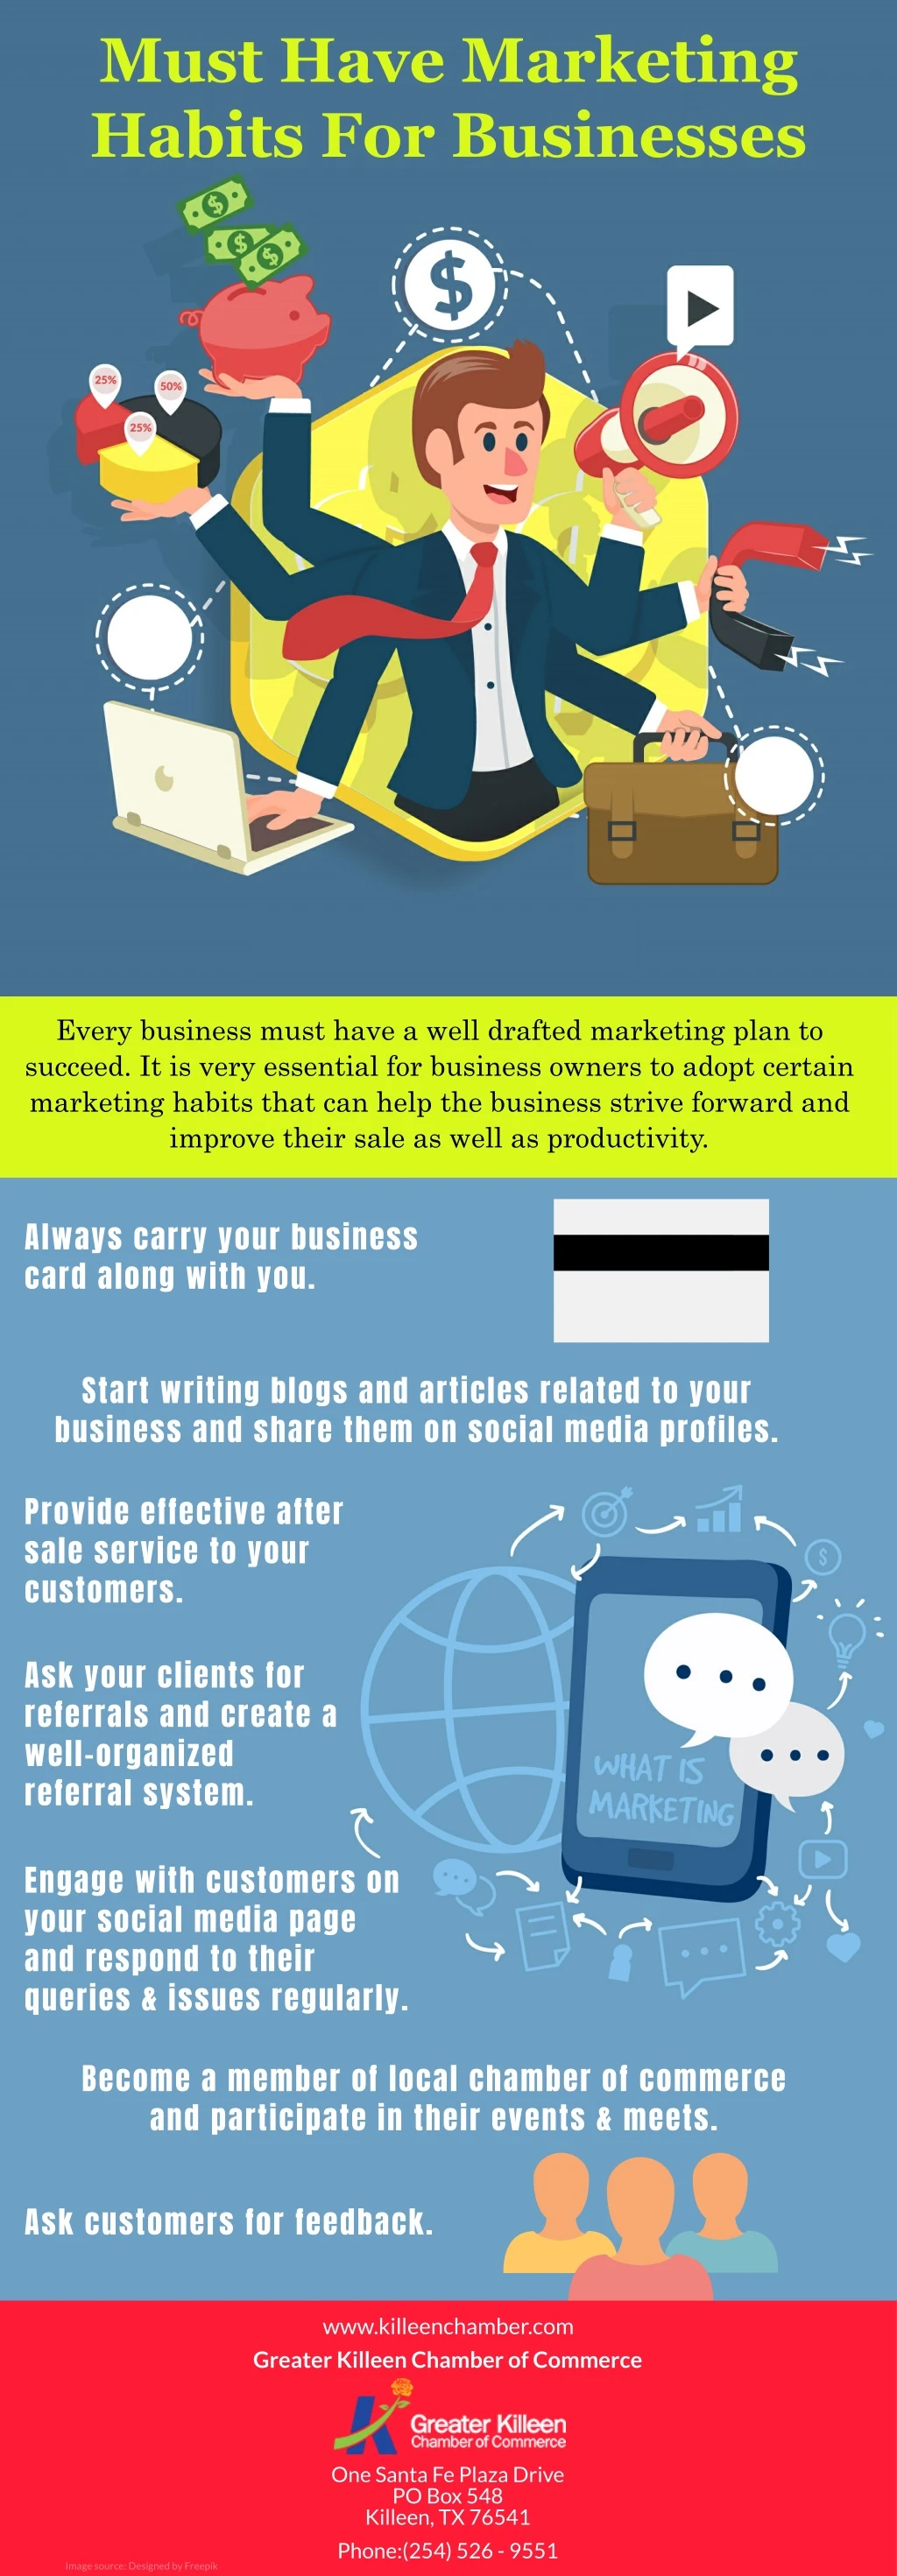 must have marketing habits for businesses